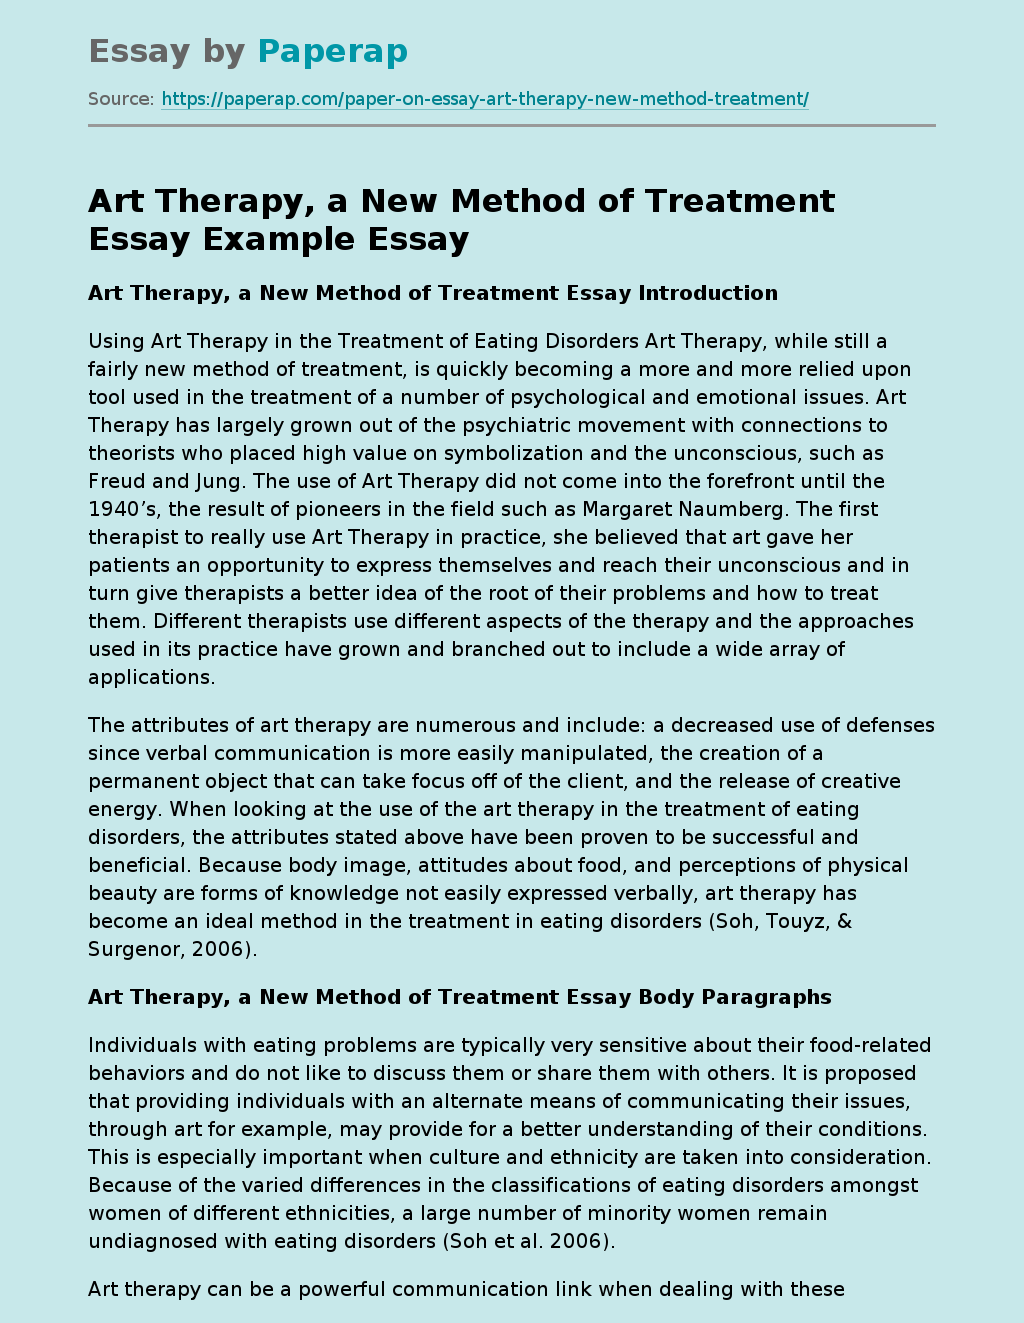 Art Therapy, a New Method of Treatment Essay Example